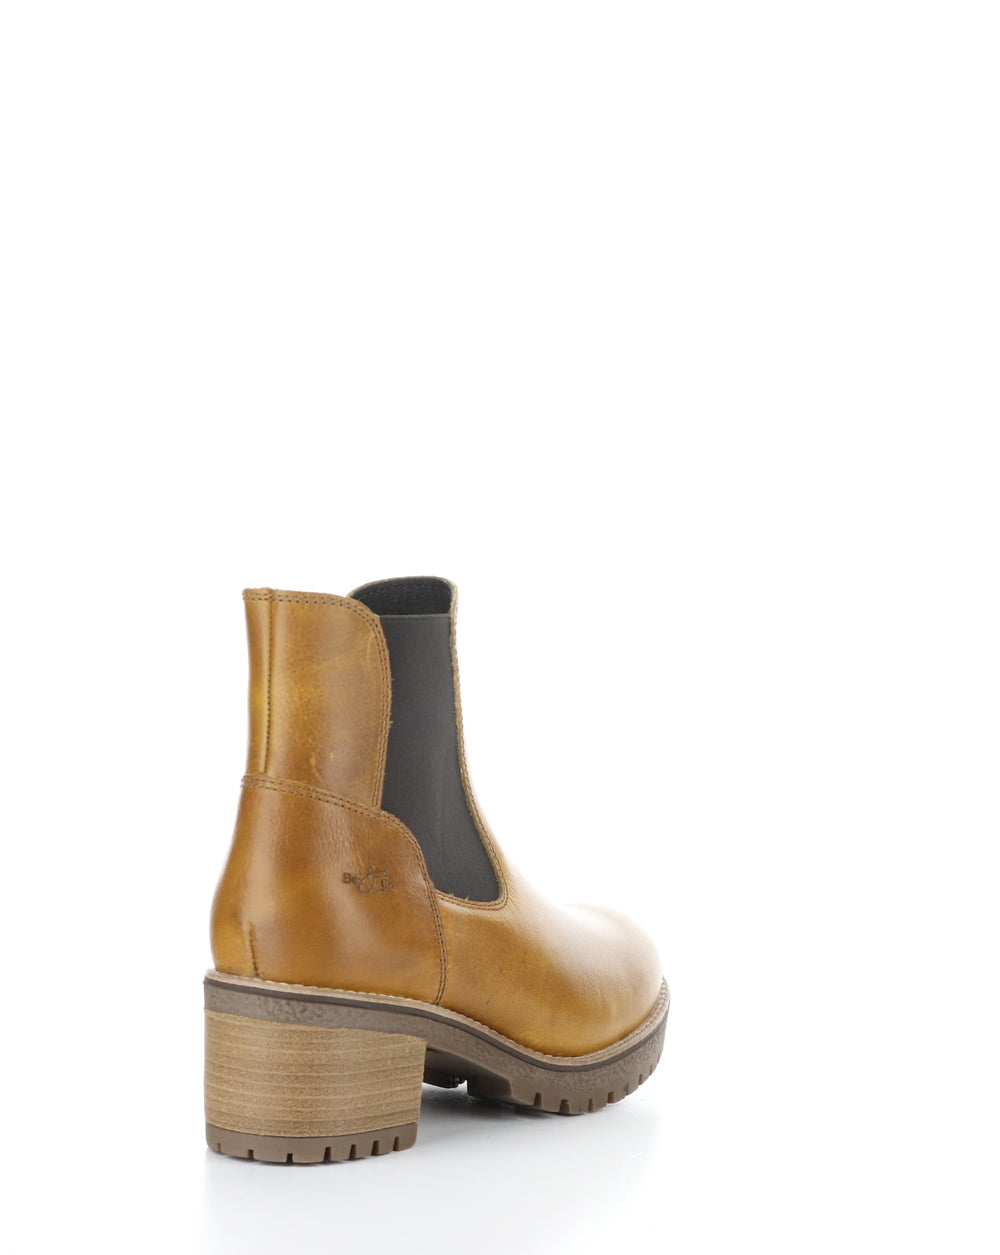 MERCY WOOL CAMEL Elasticated Boots